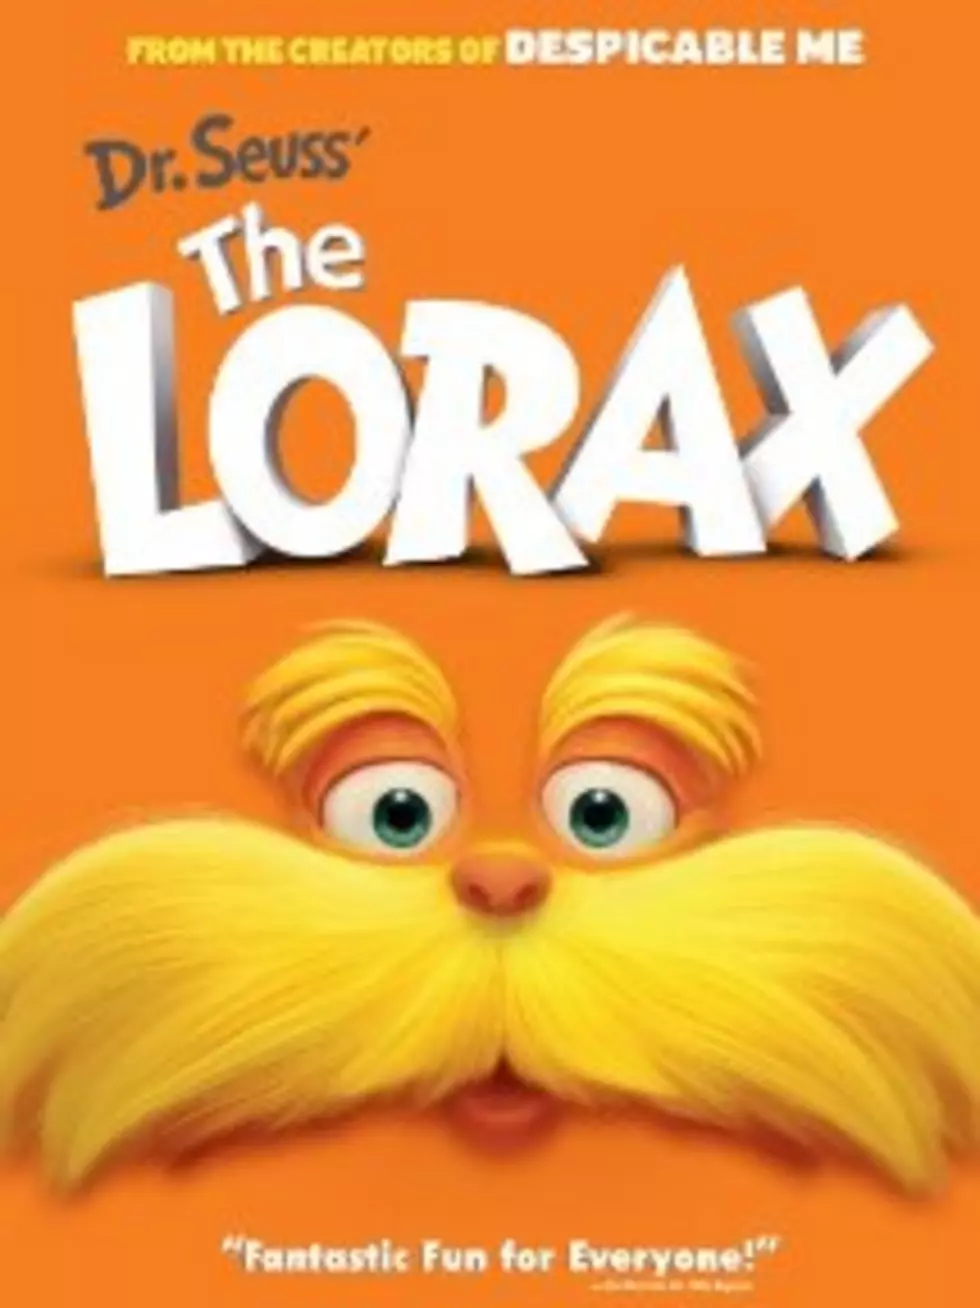 This Friday Night’s FREE Downtown Movie Is “Dr. Suess’ The Lorax”